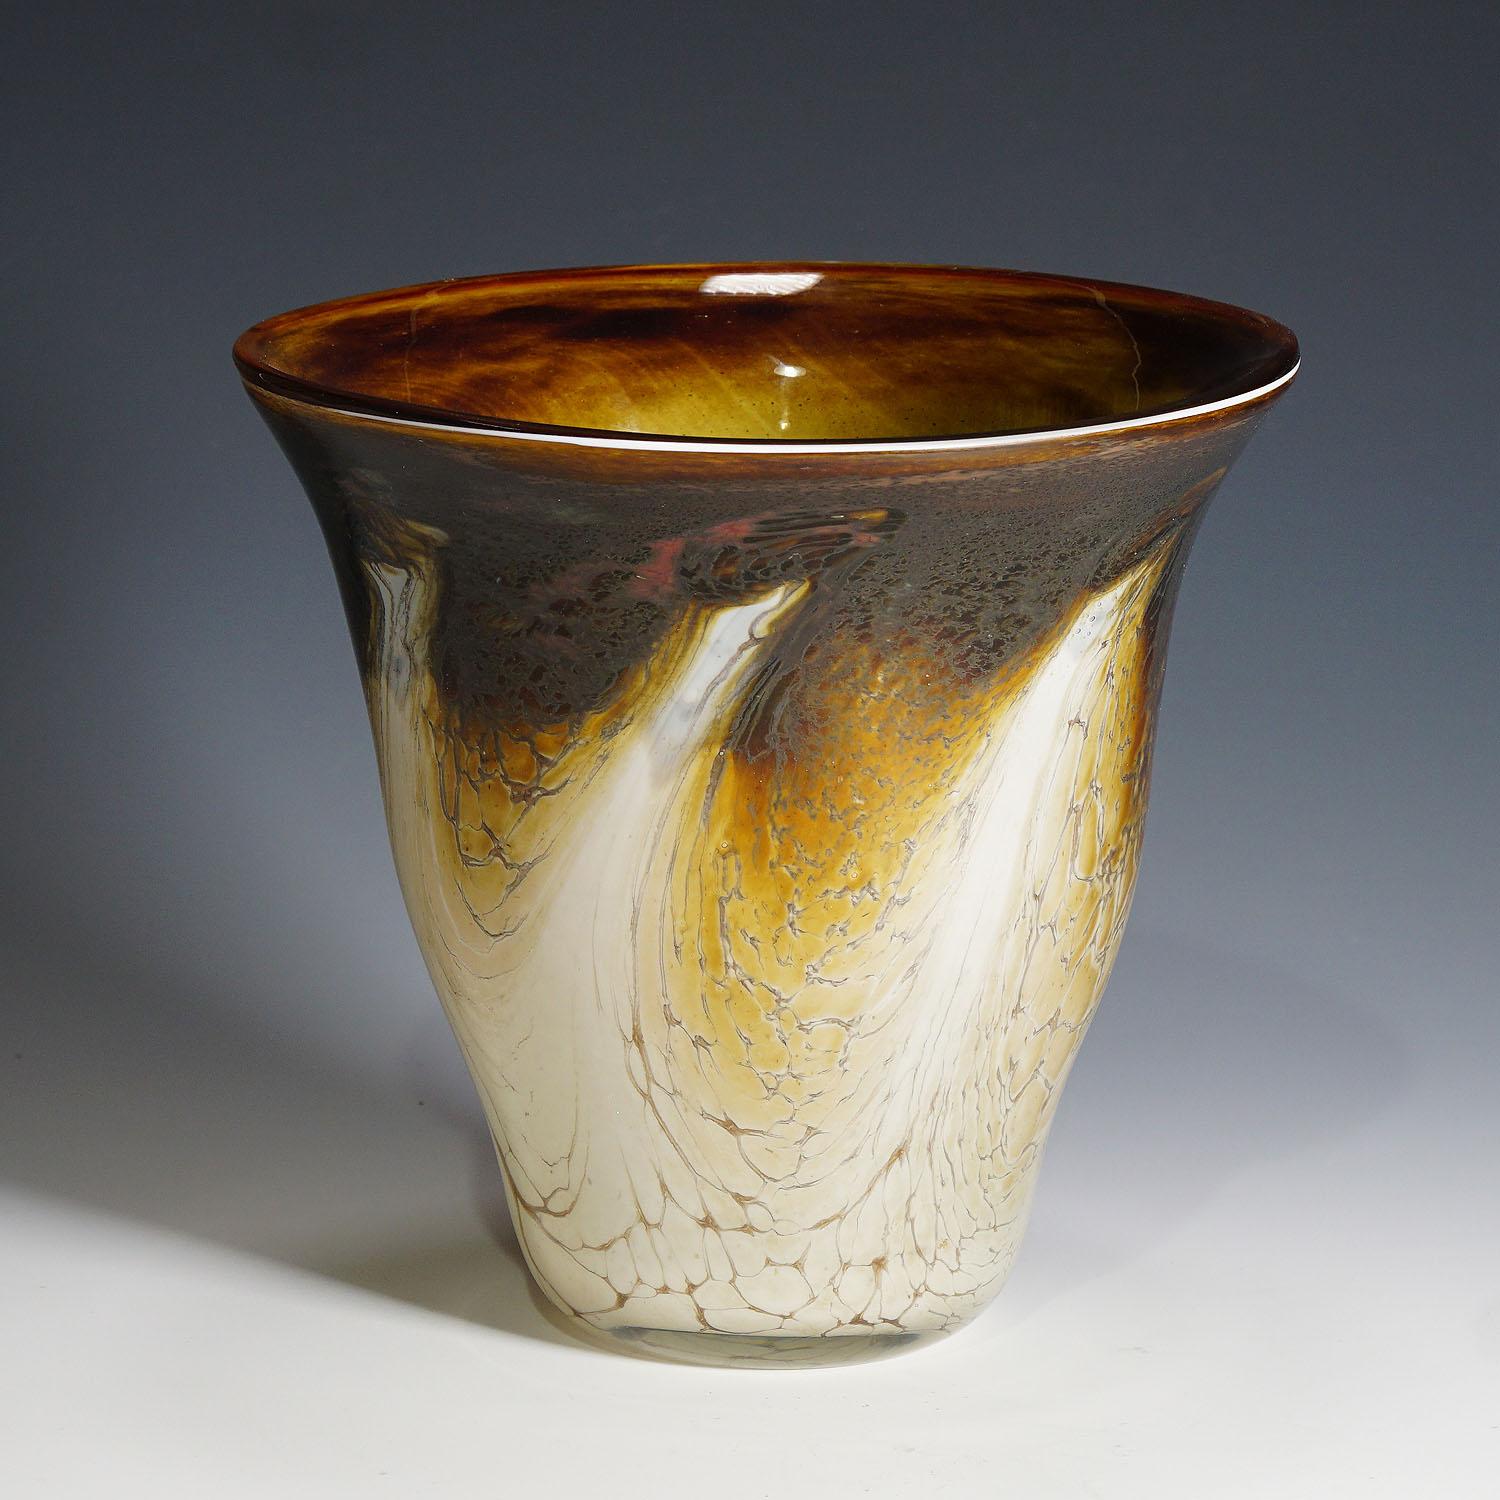 A vintage vase designed by the British glass artists Richard Glass, circa 1980. White opaque glass with brown inclusions and clear glass overlay. The intention of the design was to reproduce the techniques of Victorian glass makers by making glass